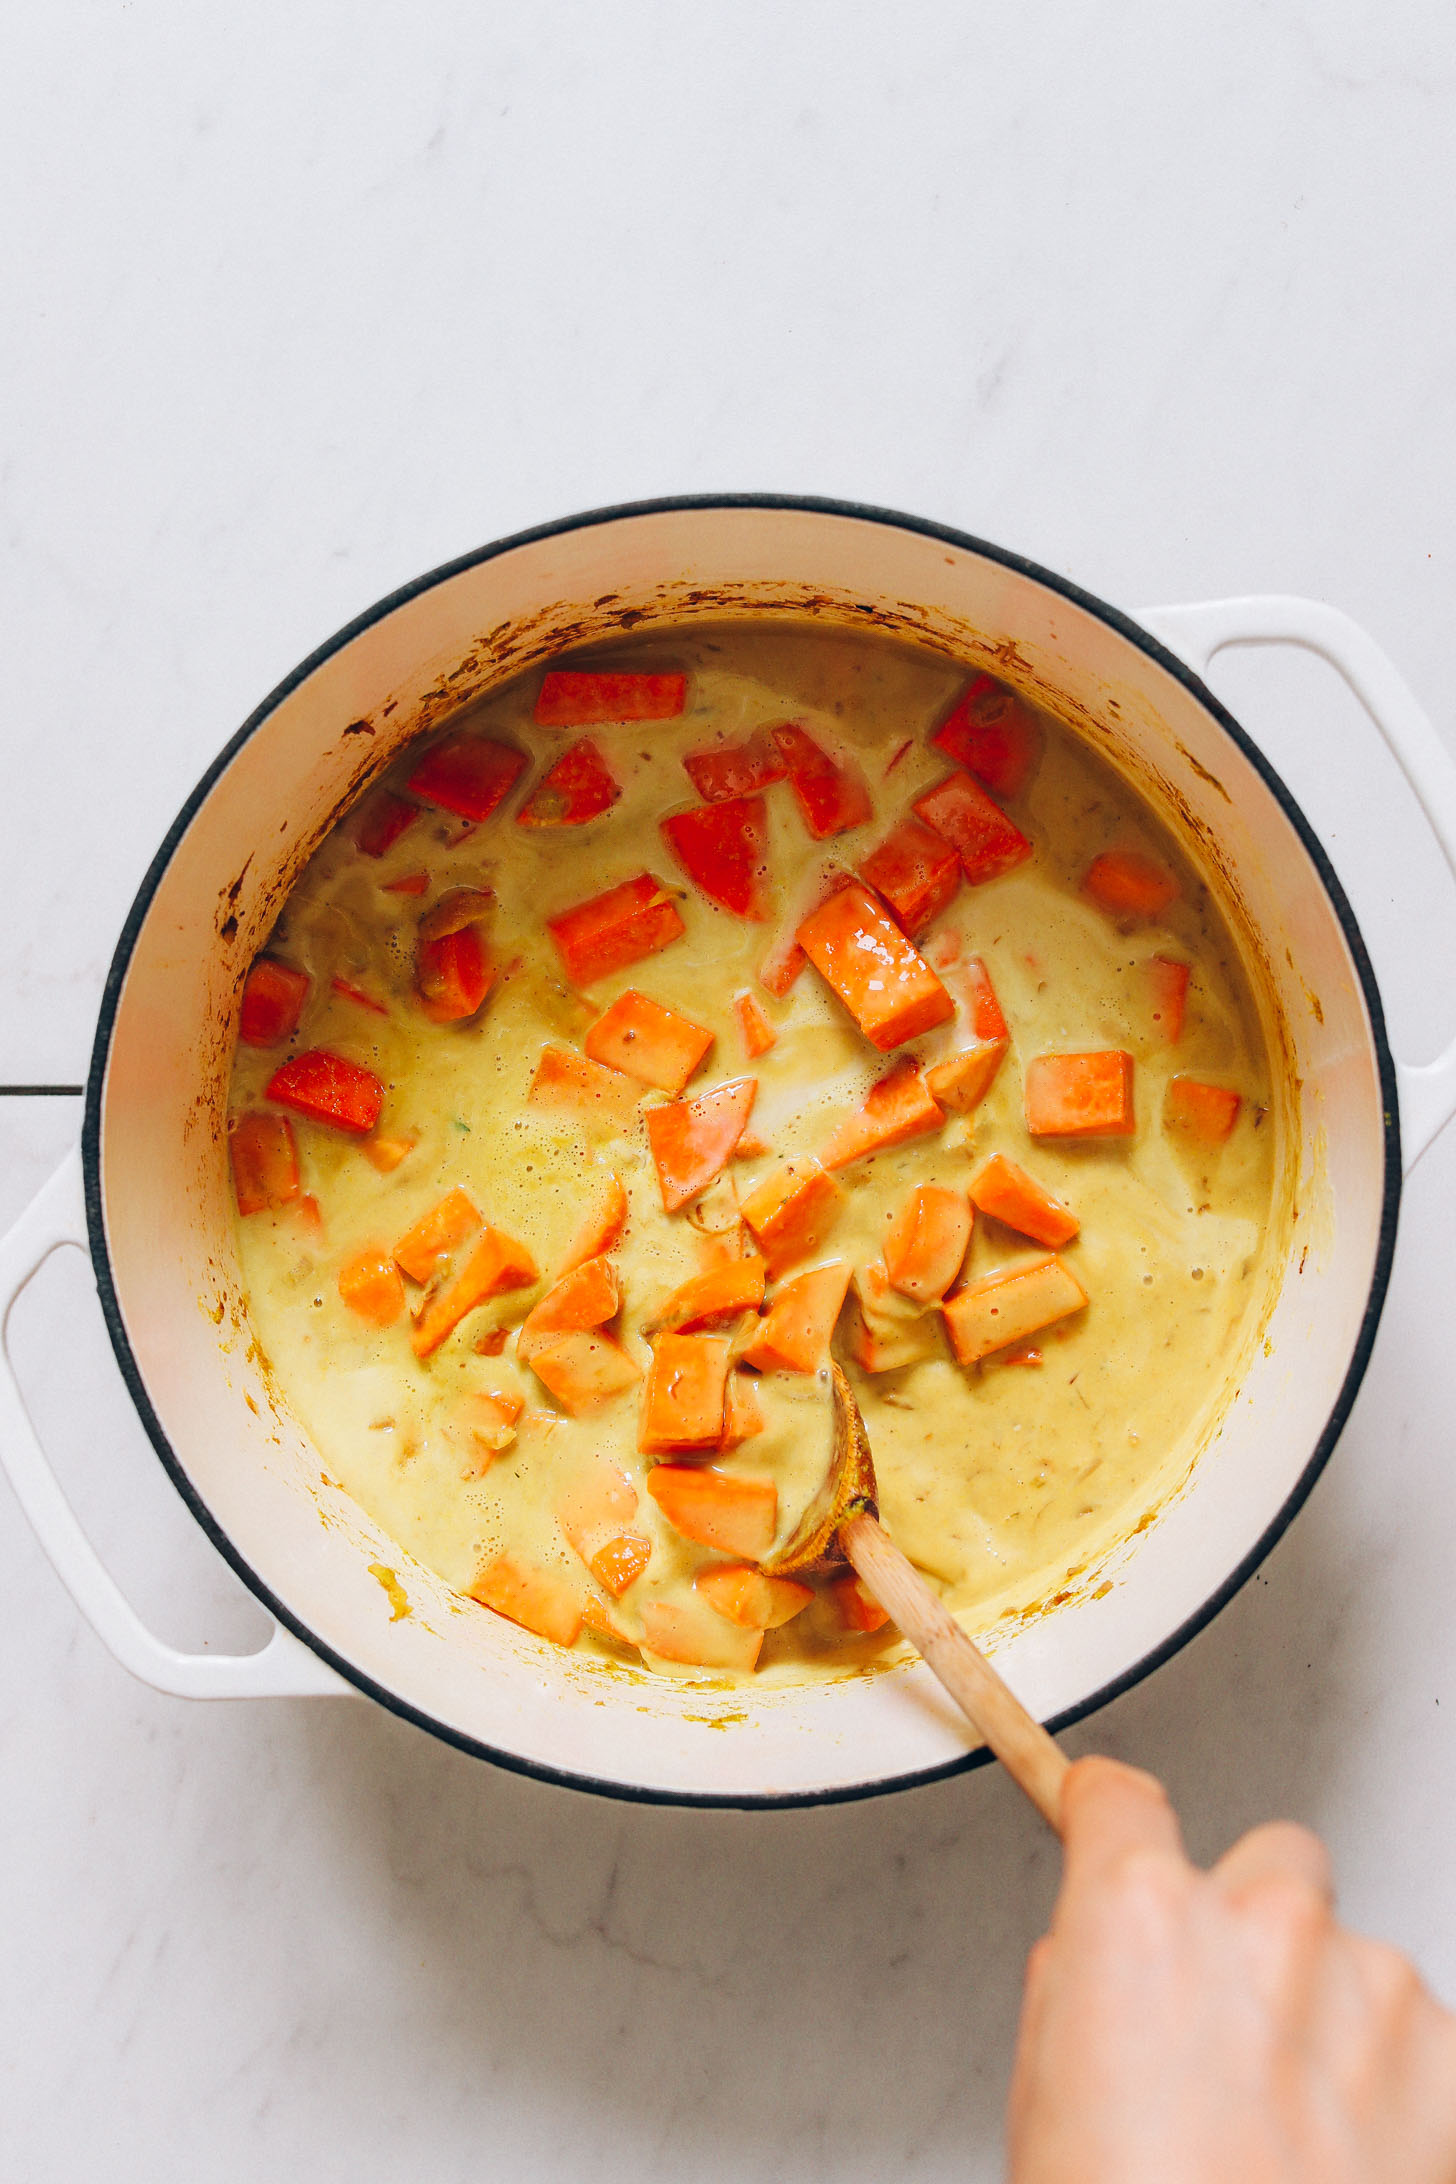 Pot of coconut milk, sweet potatoes, and green curry paste